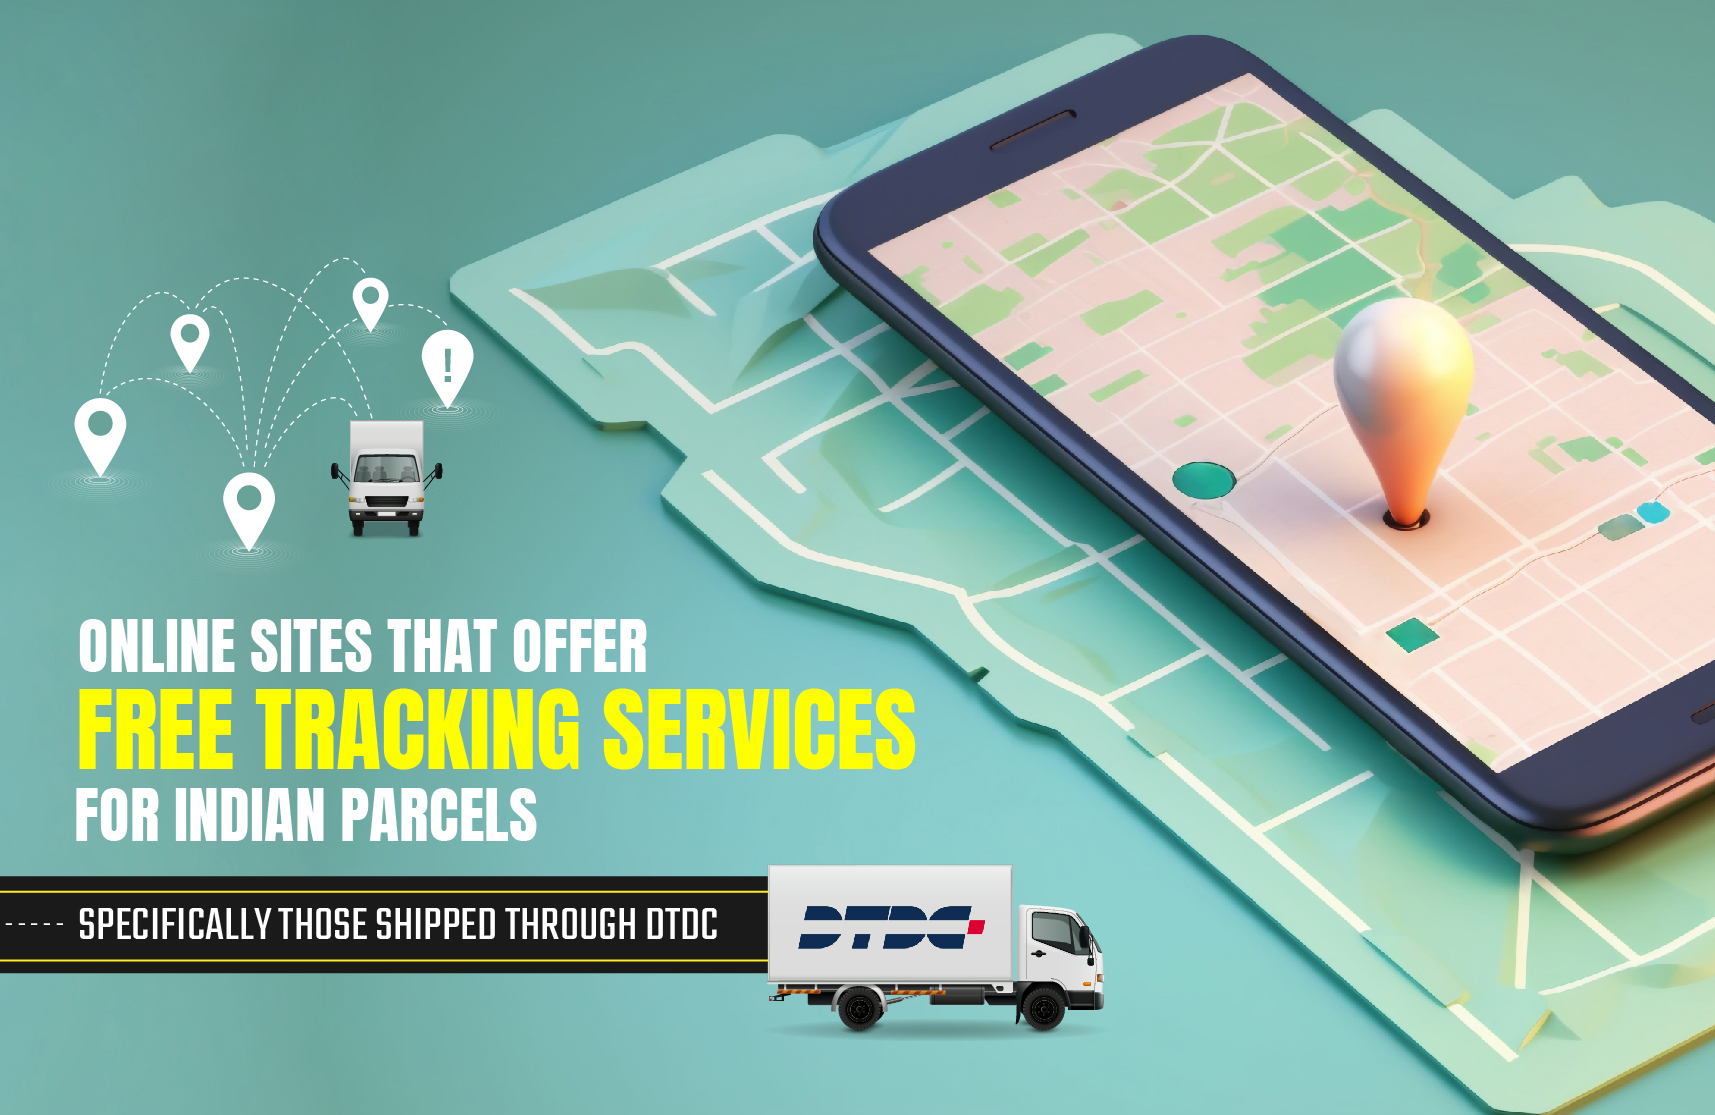 Online Sites that Offer Free Tracking Services for Indian Parcels, Specifically those Shipped through DTDC